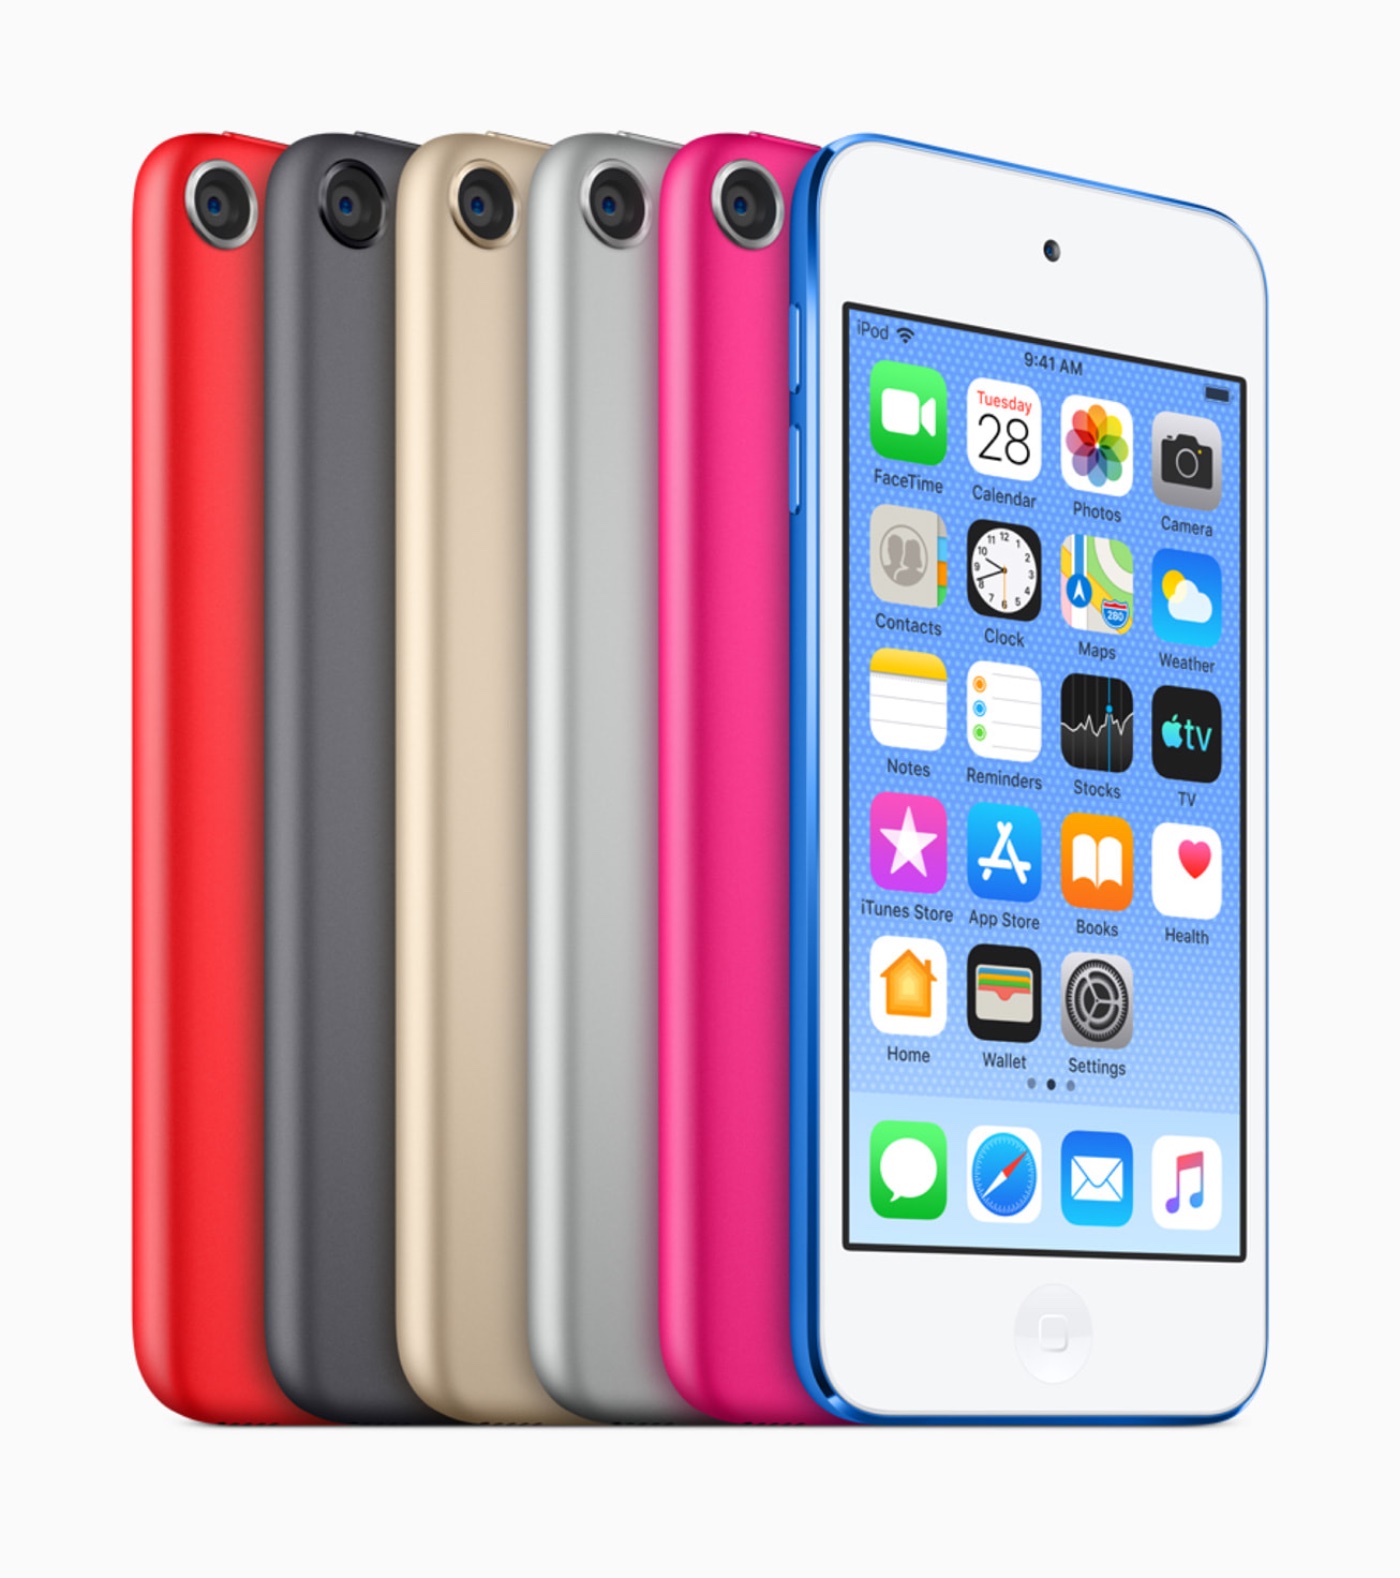 photo of iPod Touch completely sold out at Apple’s online U.S. store image